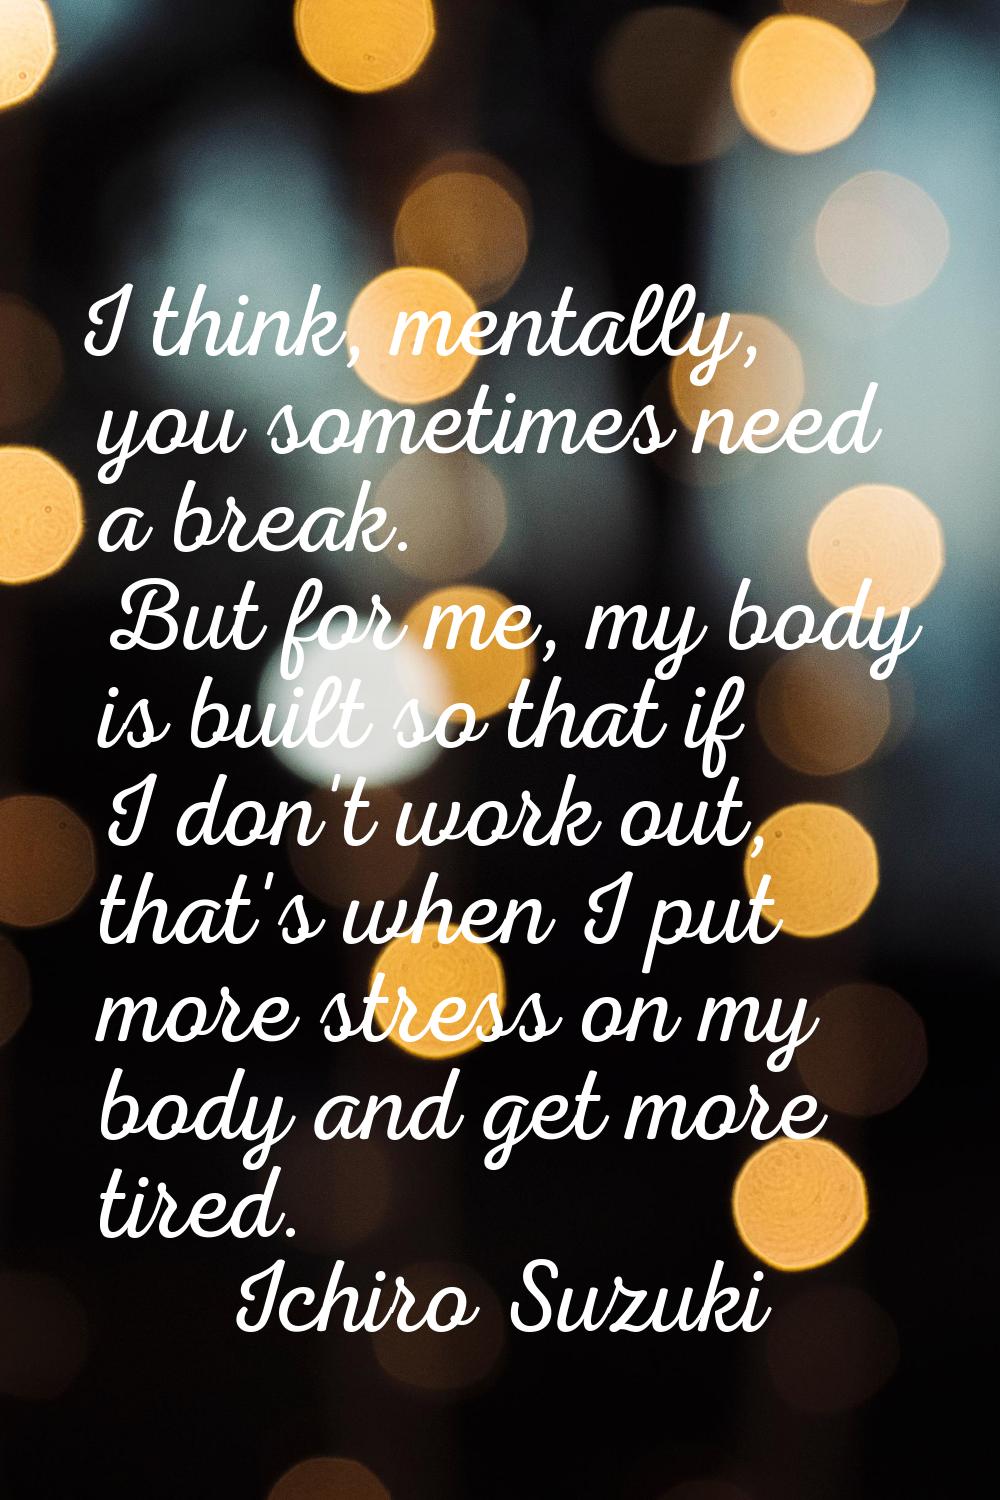 I think, mentally, you sometimes need a break. But for me, my body is built so that if I don't work